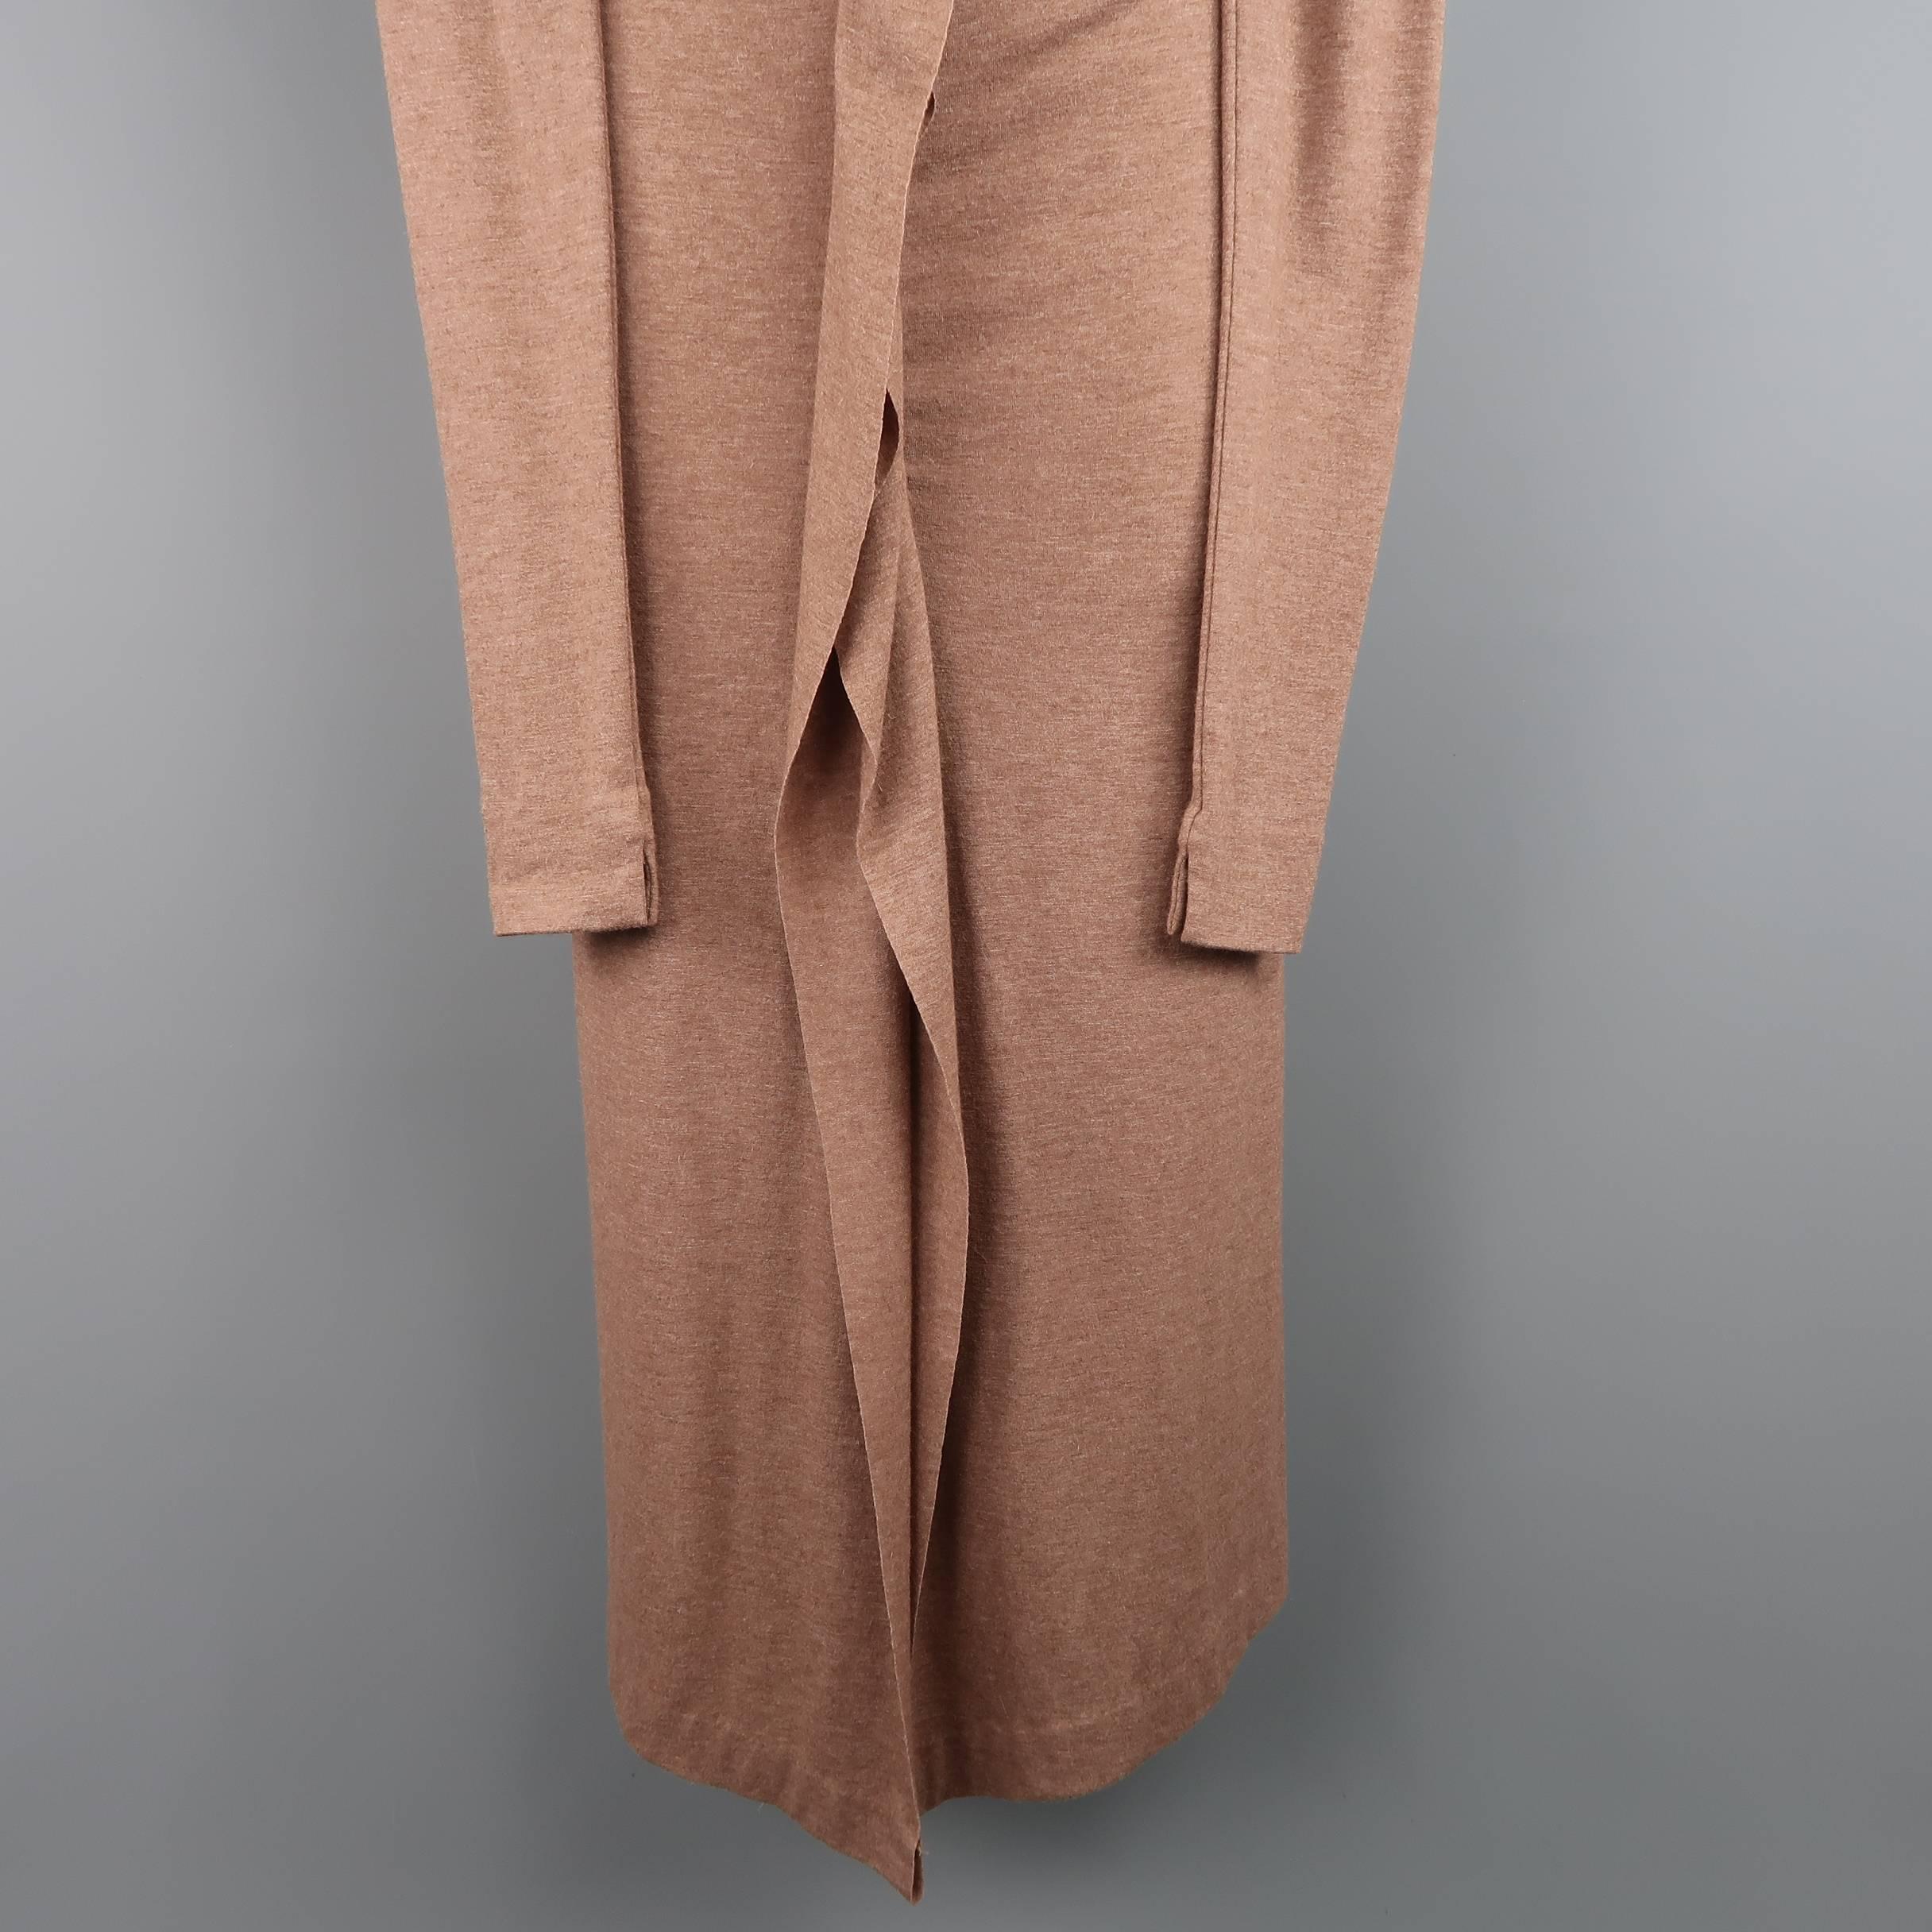 JEAN PAUL GAULTIER maxi dress comes in a tan wool rayon blend heather jersey and features a boat neckline, extra long sleeves, fitted silhouette, slit front, and asymmetrical ruffle. Made in Italy.
 
Excellent Pre-Owned Condition.
Marked: 8
